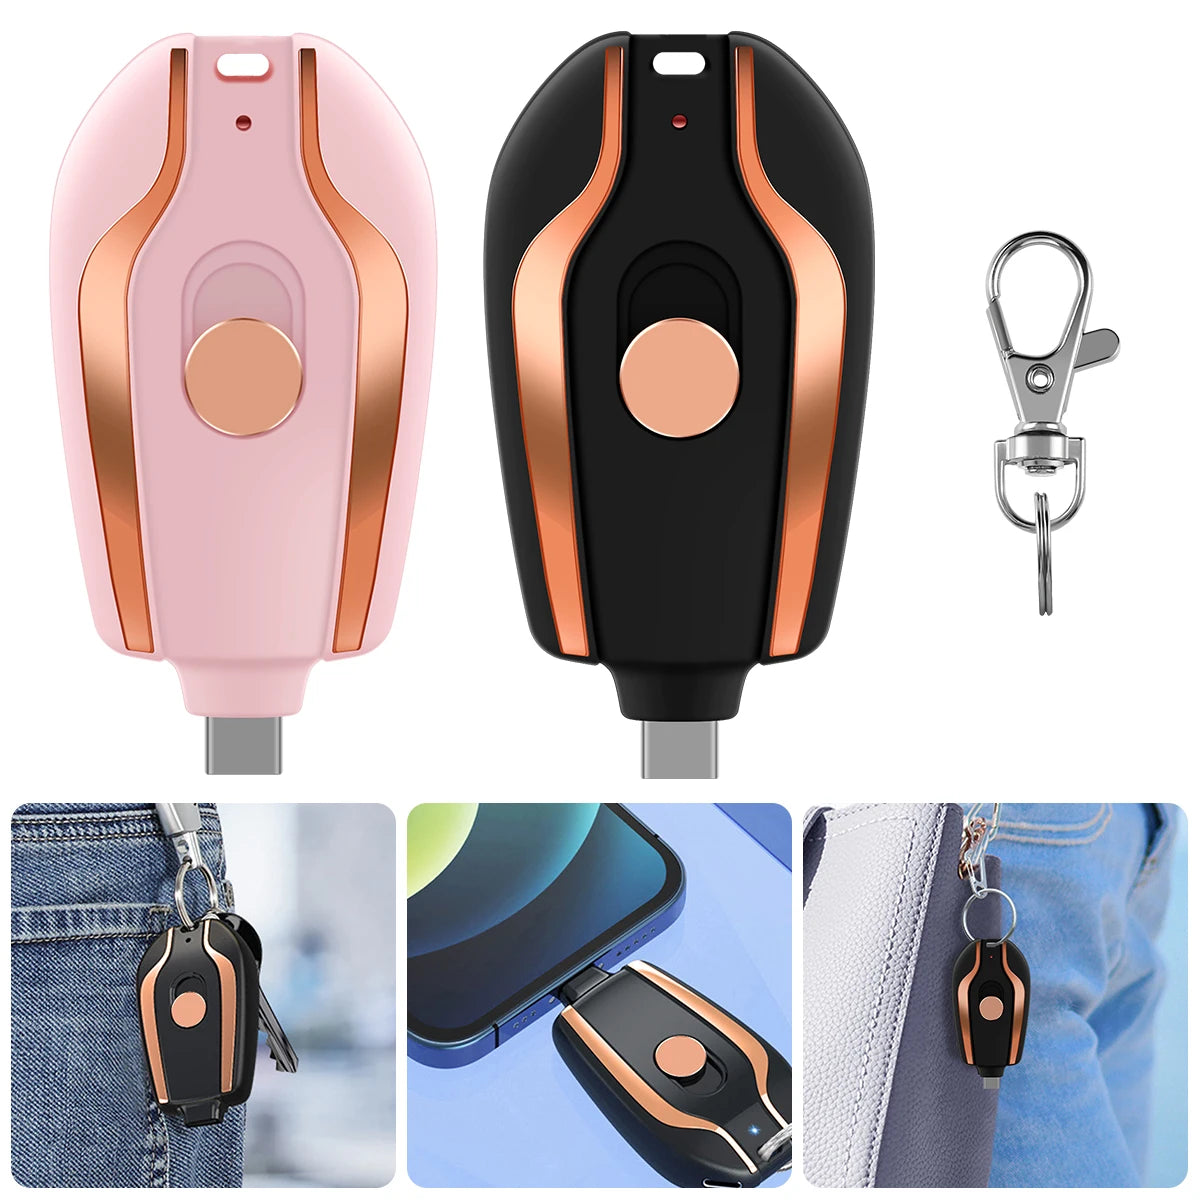 Mini Keychain Portable Charger Power Bank